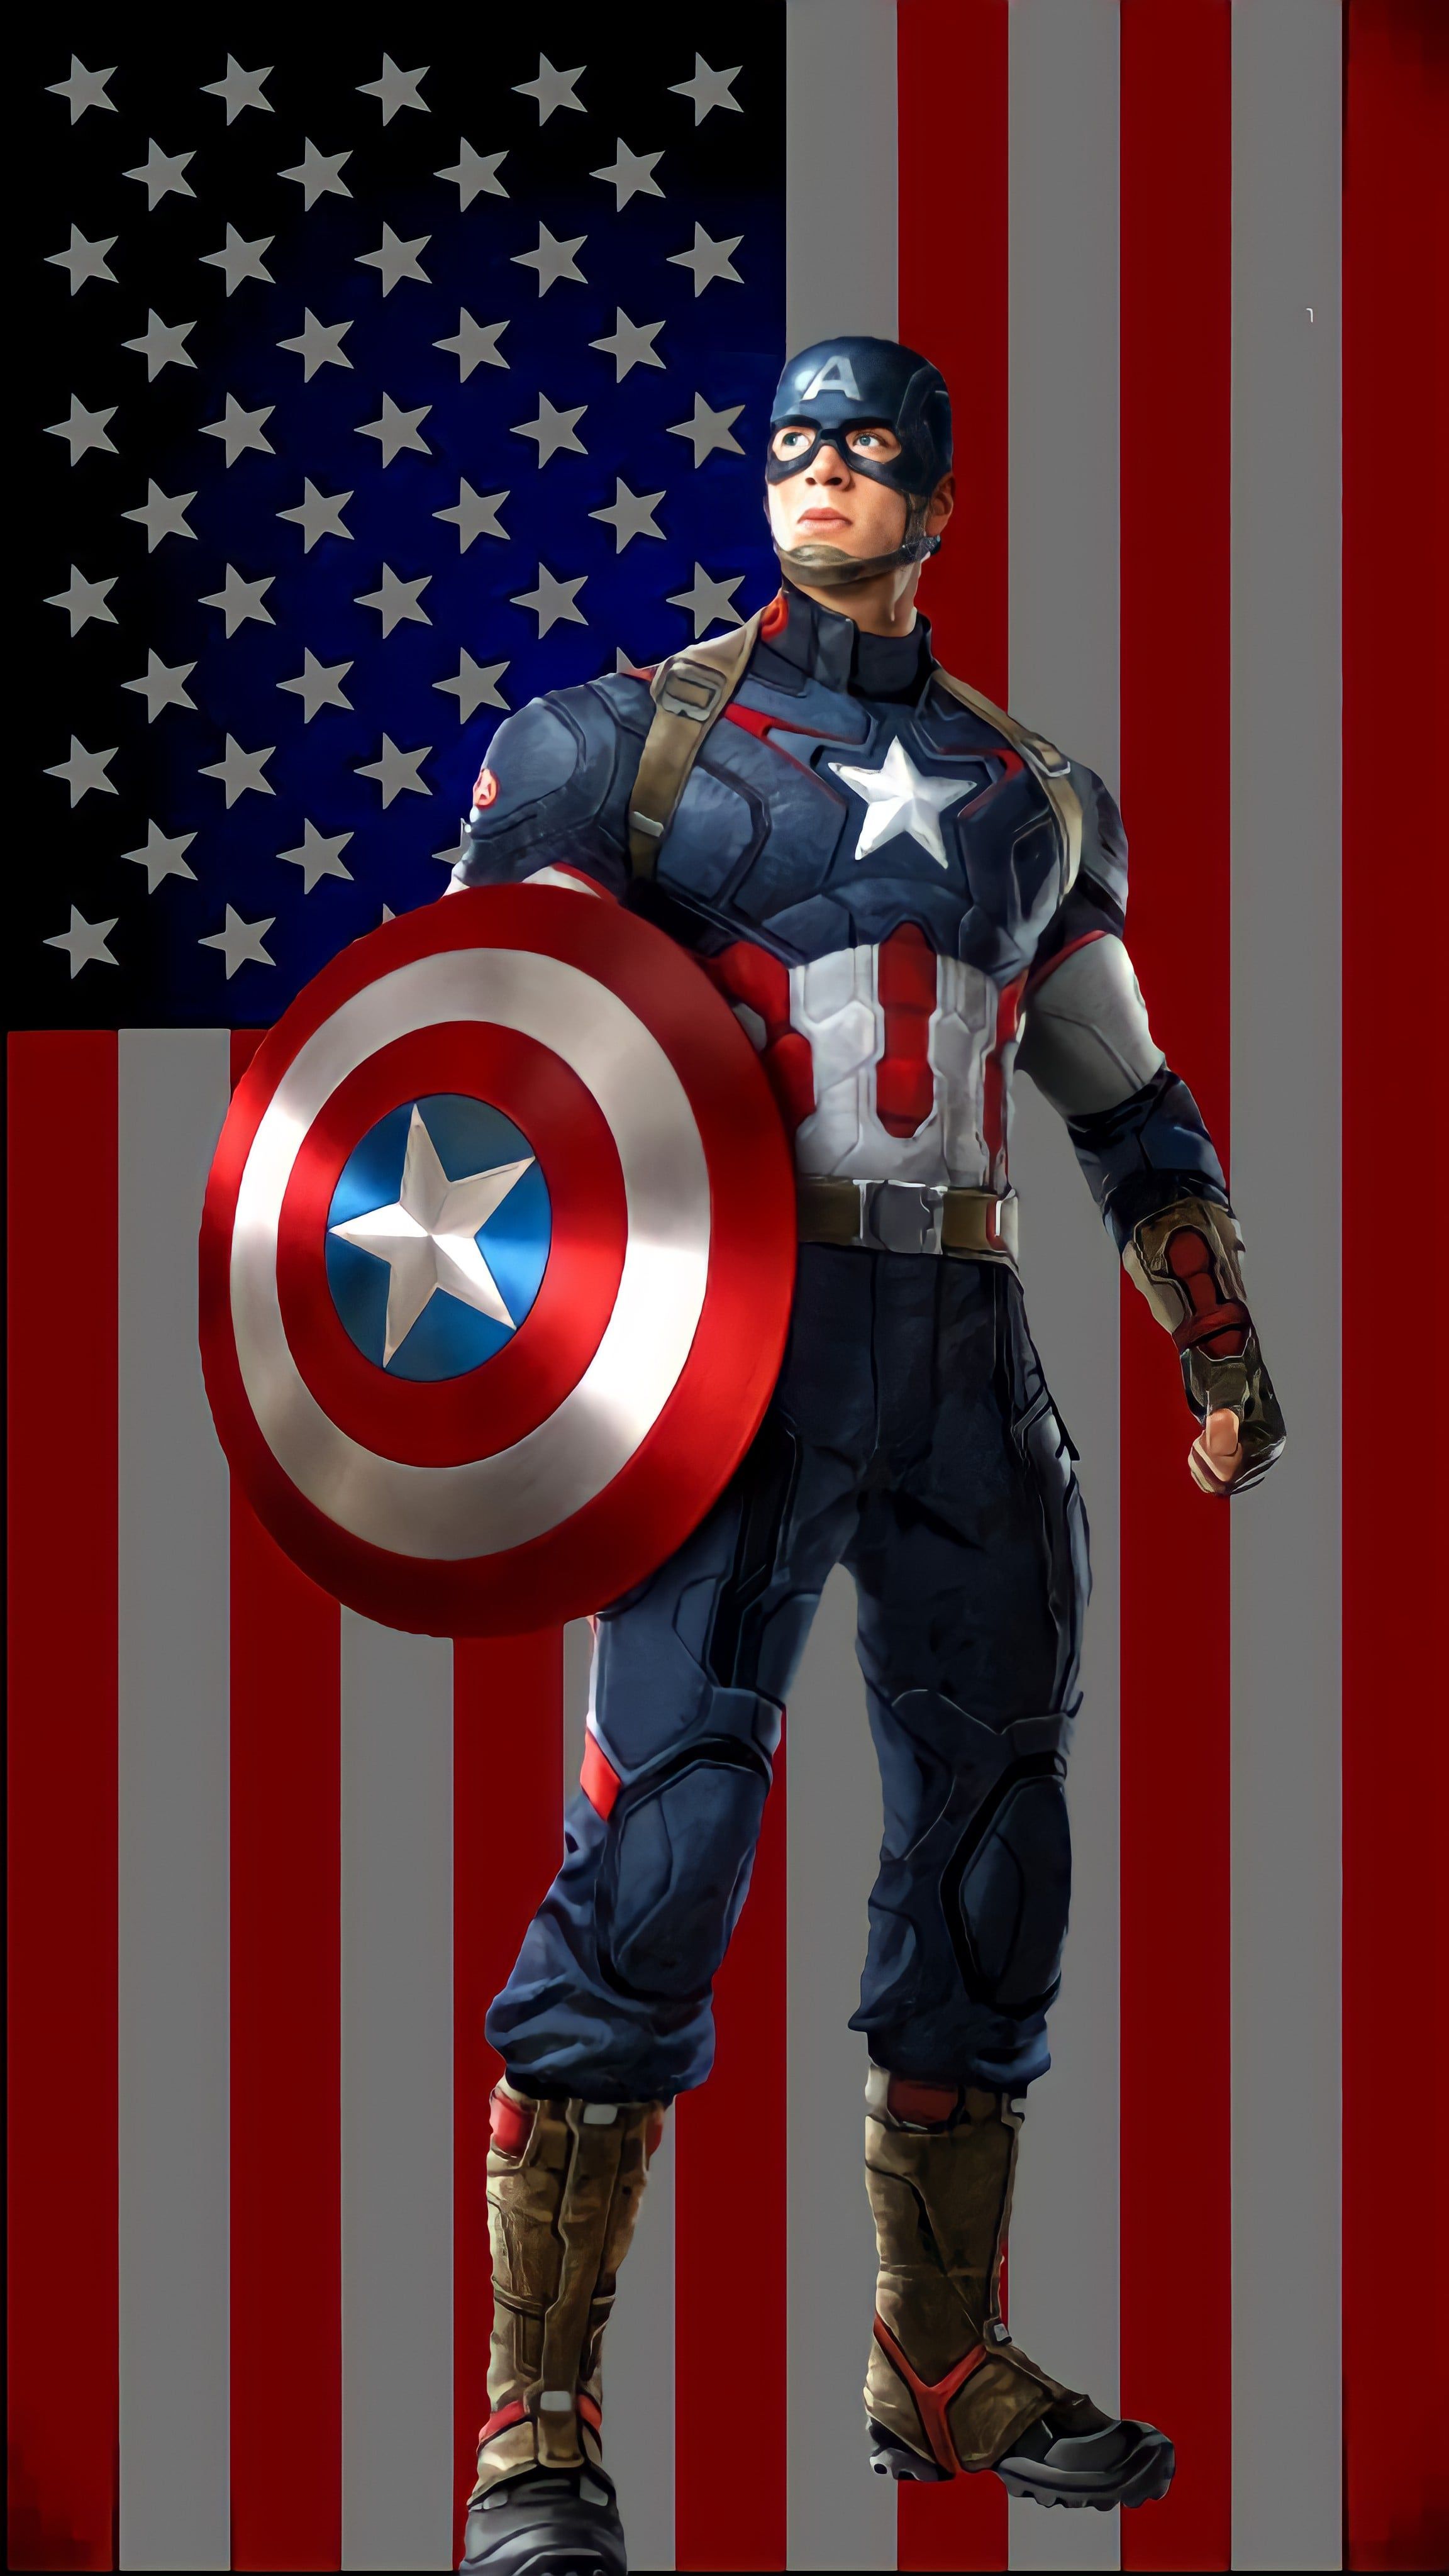 Here's a couple of Captain America Wallpaper. Feel free to use them